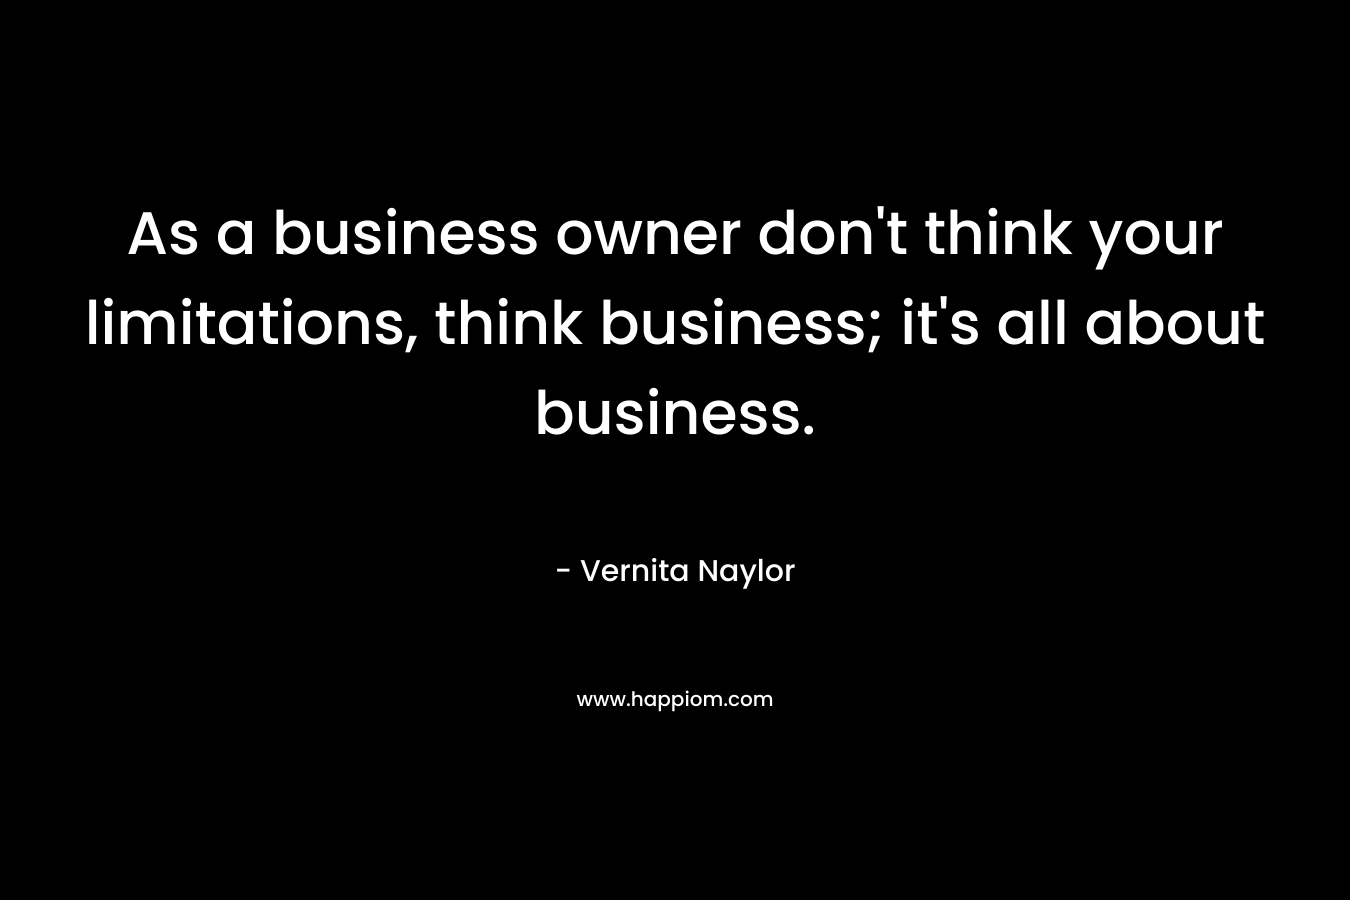 As a business owner don't think your limitations, think business; it's all about business.